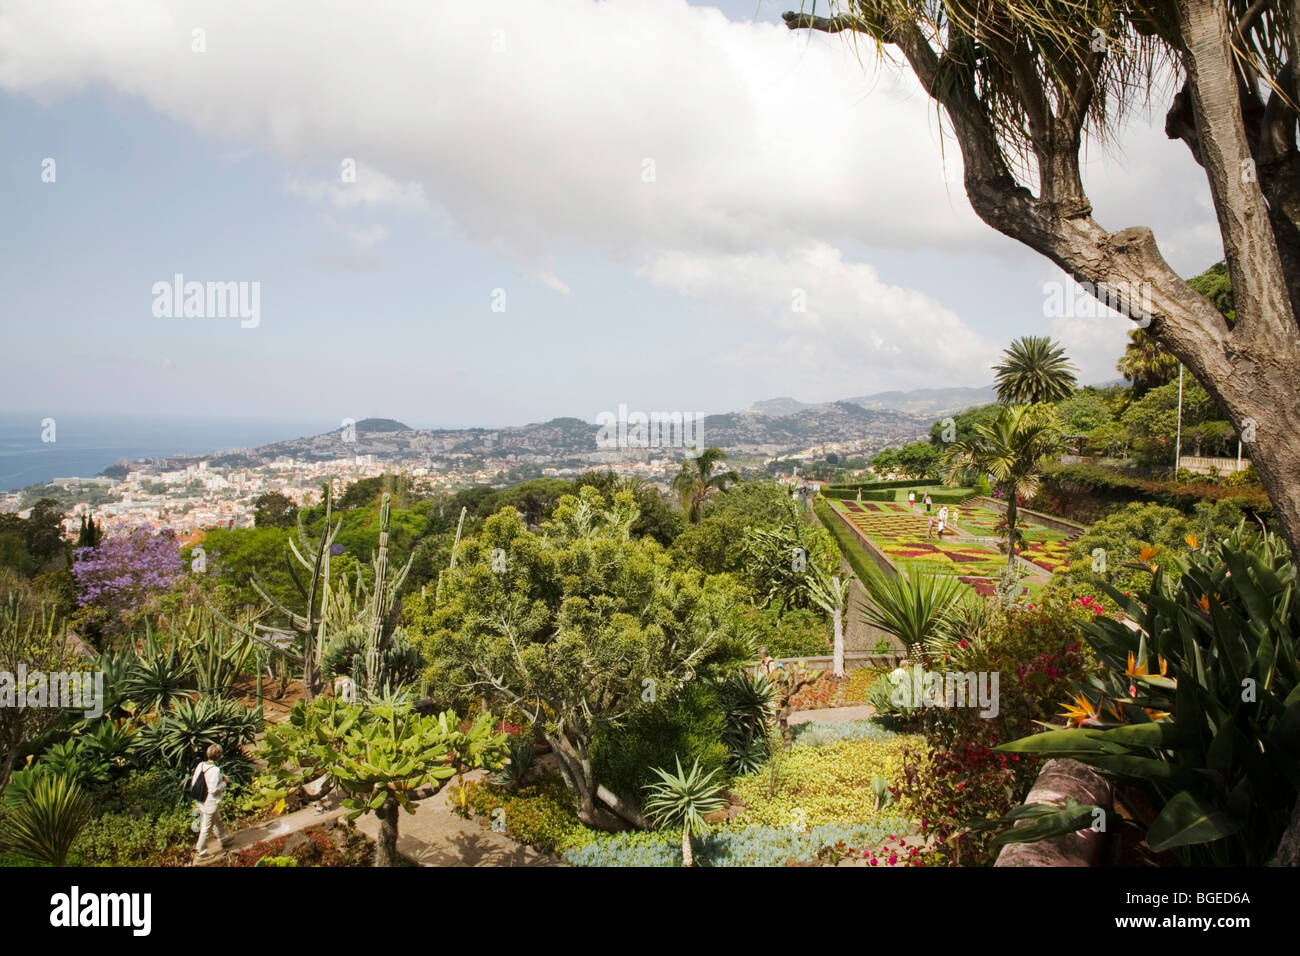 Funchal Botanical Gardens in Madeira. The city of Funchal can be seen in the distance. Stock Photo